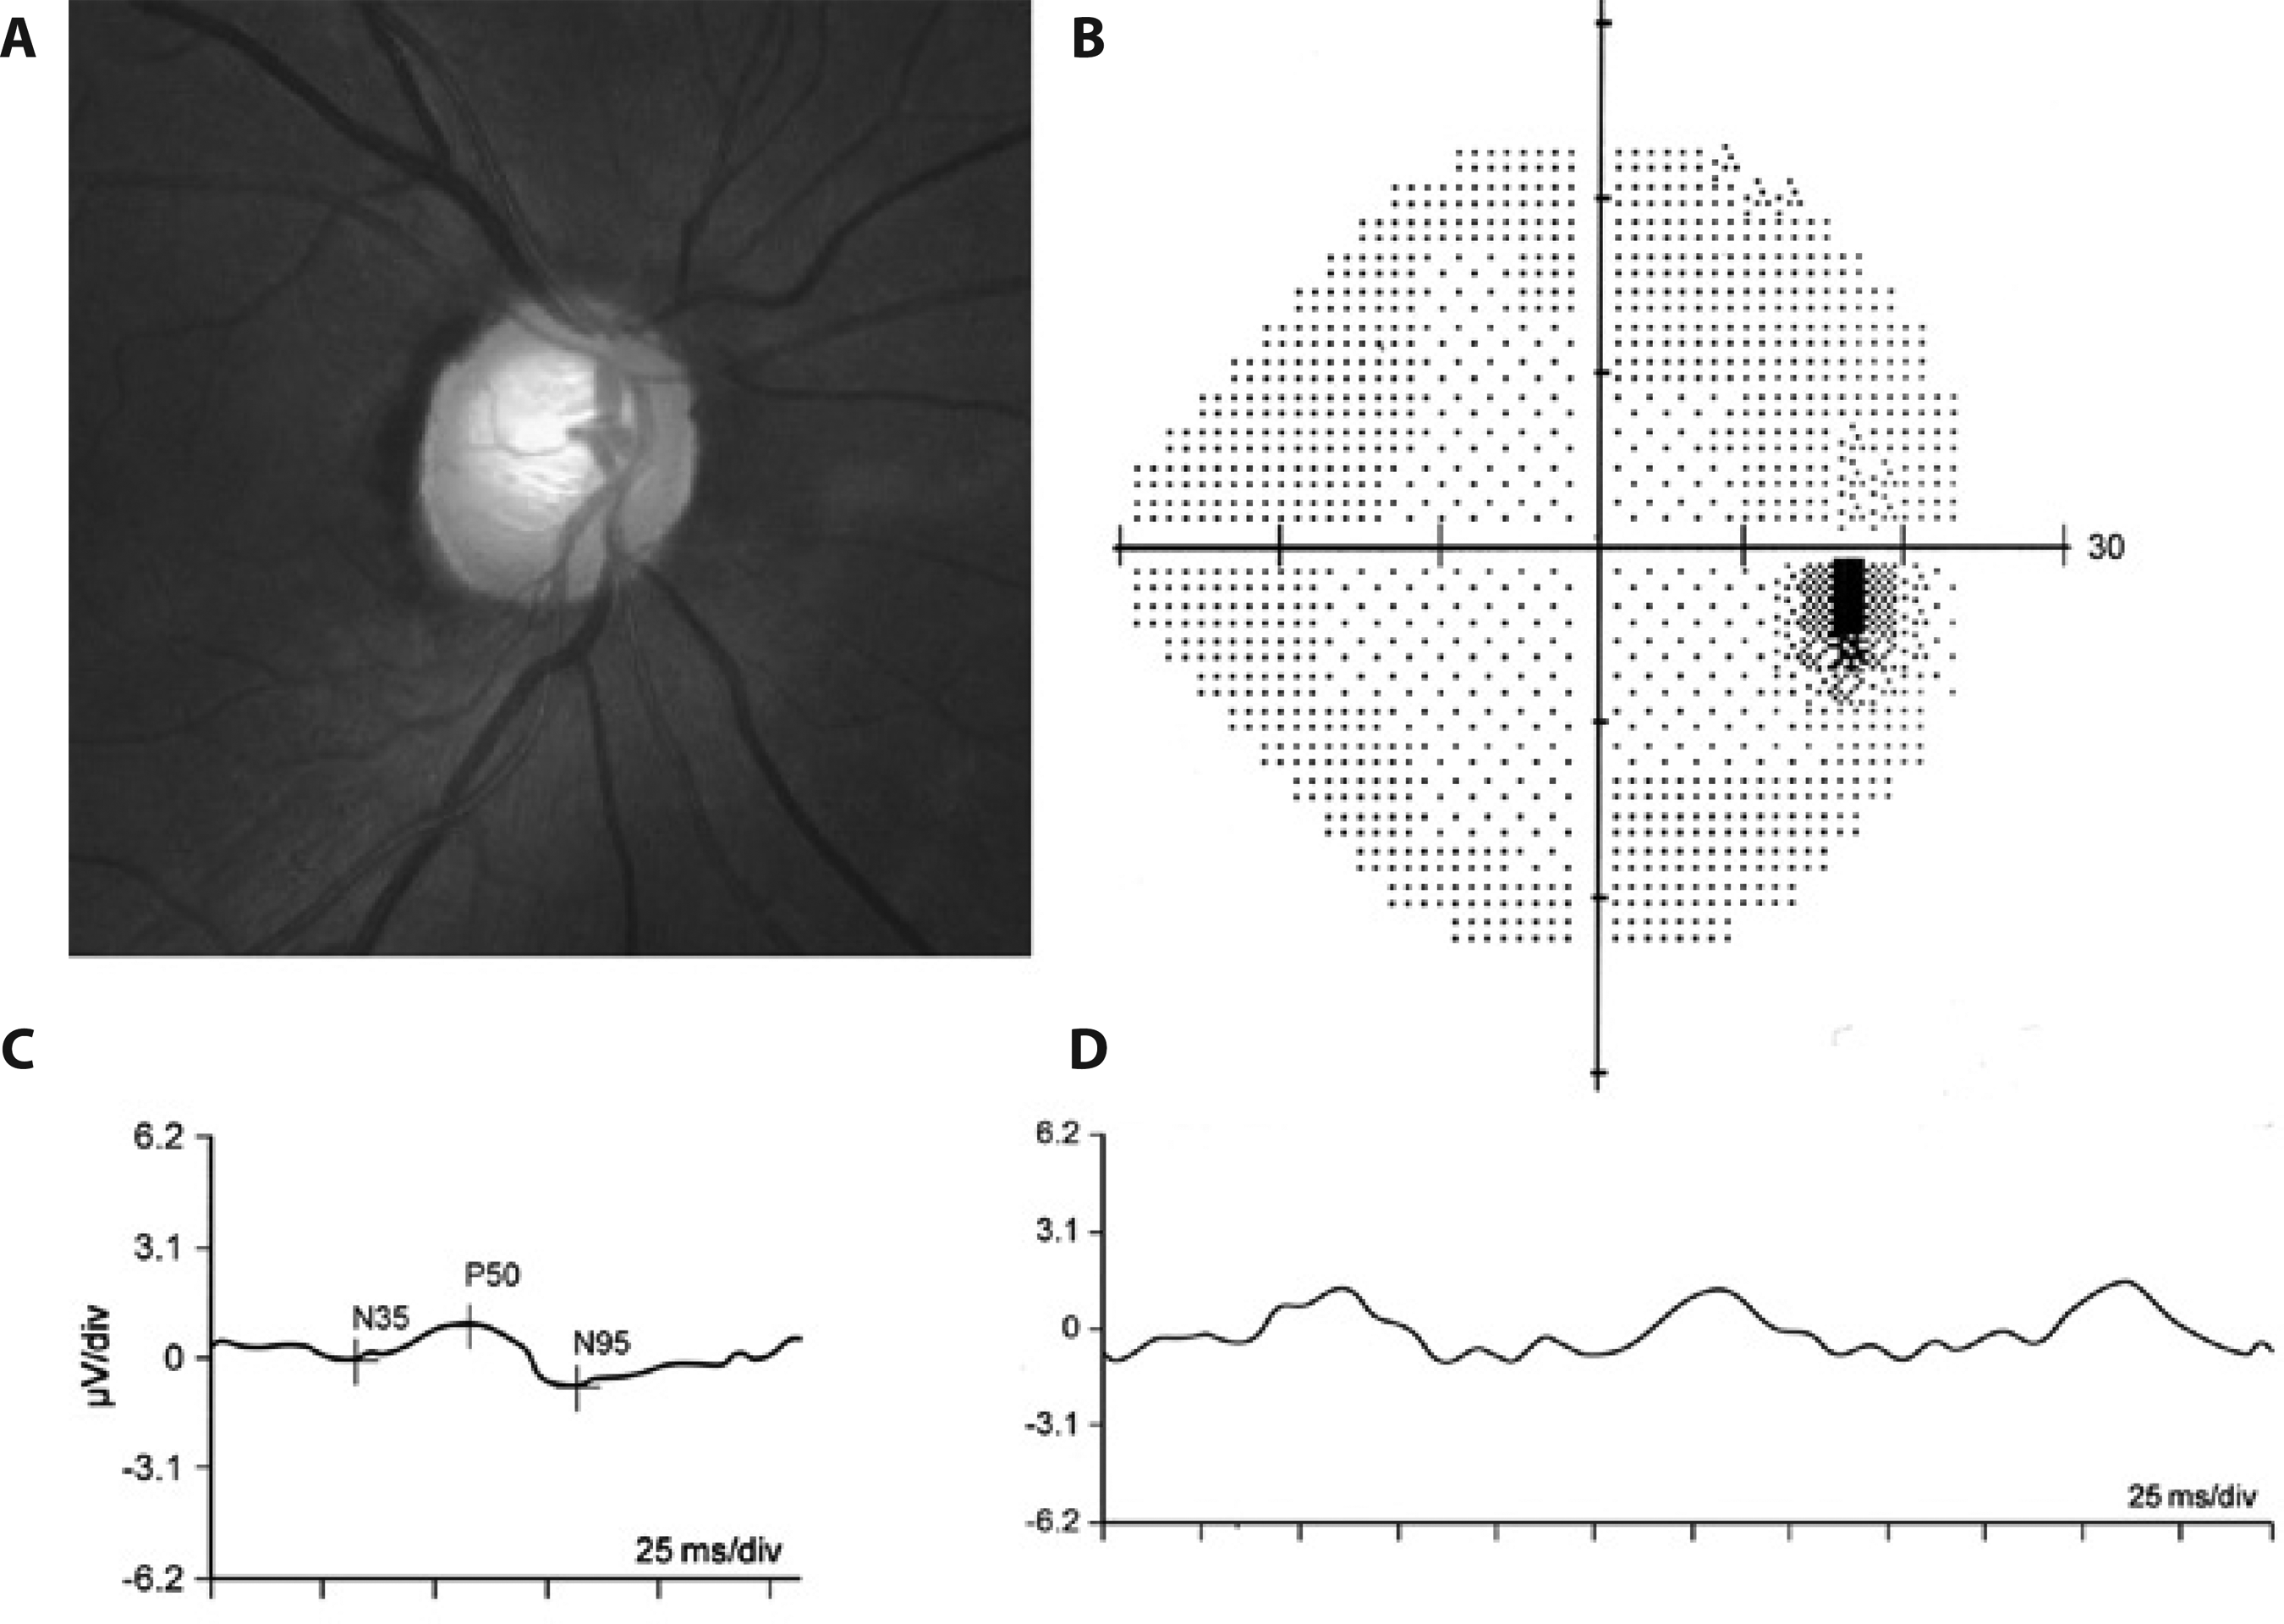 Representative example of an eye with pre-perimetric glaucoma and reduced pERG responses: (a) Fundus photo showing glaucomatous cupping; (b) normal 24-2 SITA Standard visual field result; (c) reduced transient pERG responses (P50 = 0.95μV; N95 = 1.65μV); (d) reduced steady-state PERG amplitude response (1.78μV).